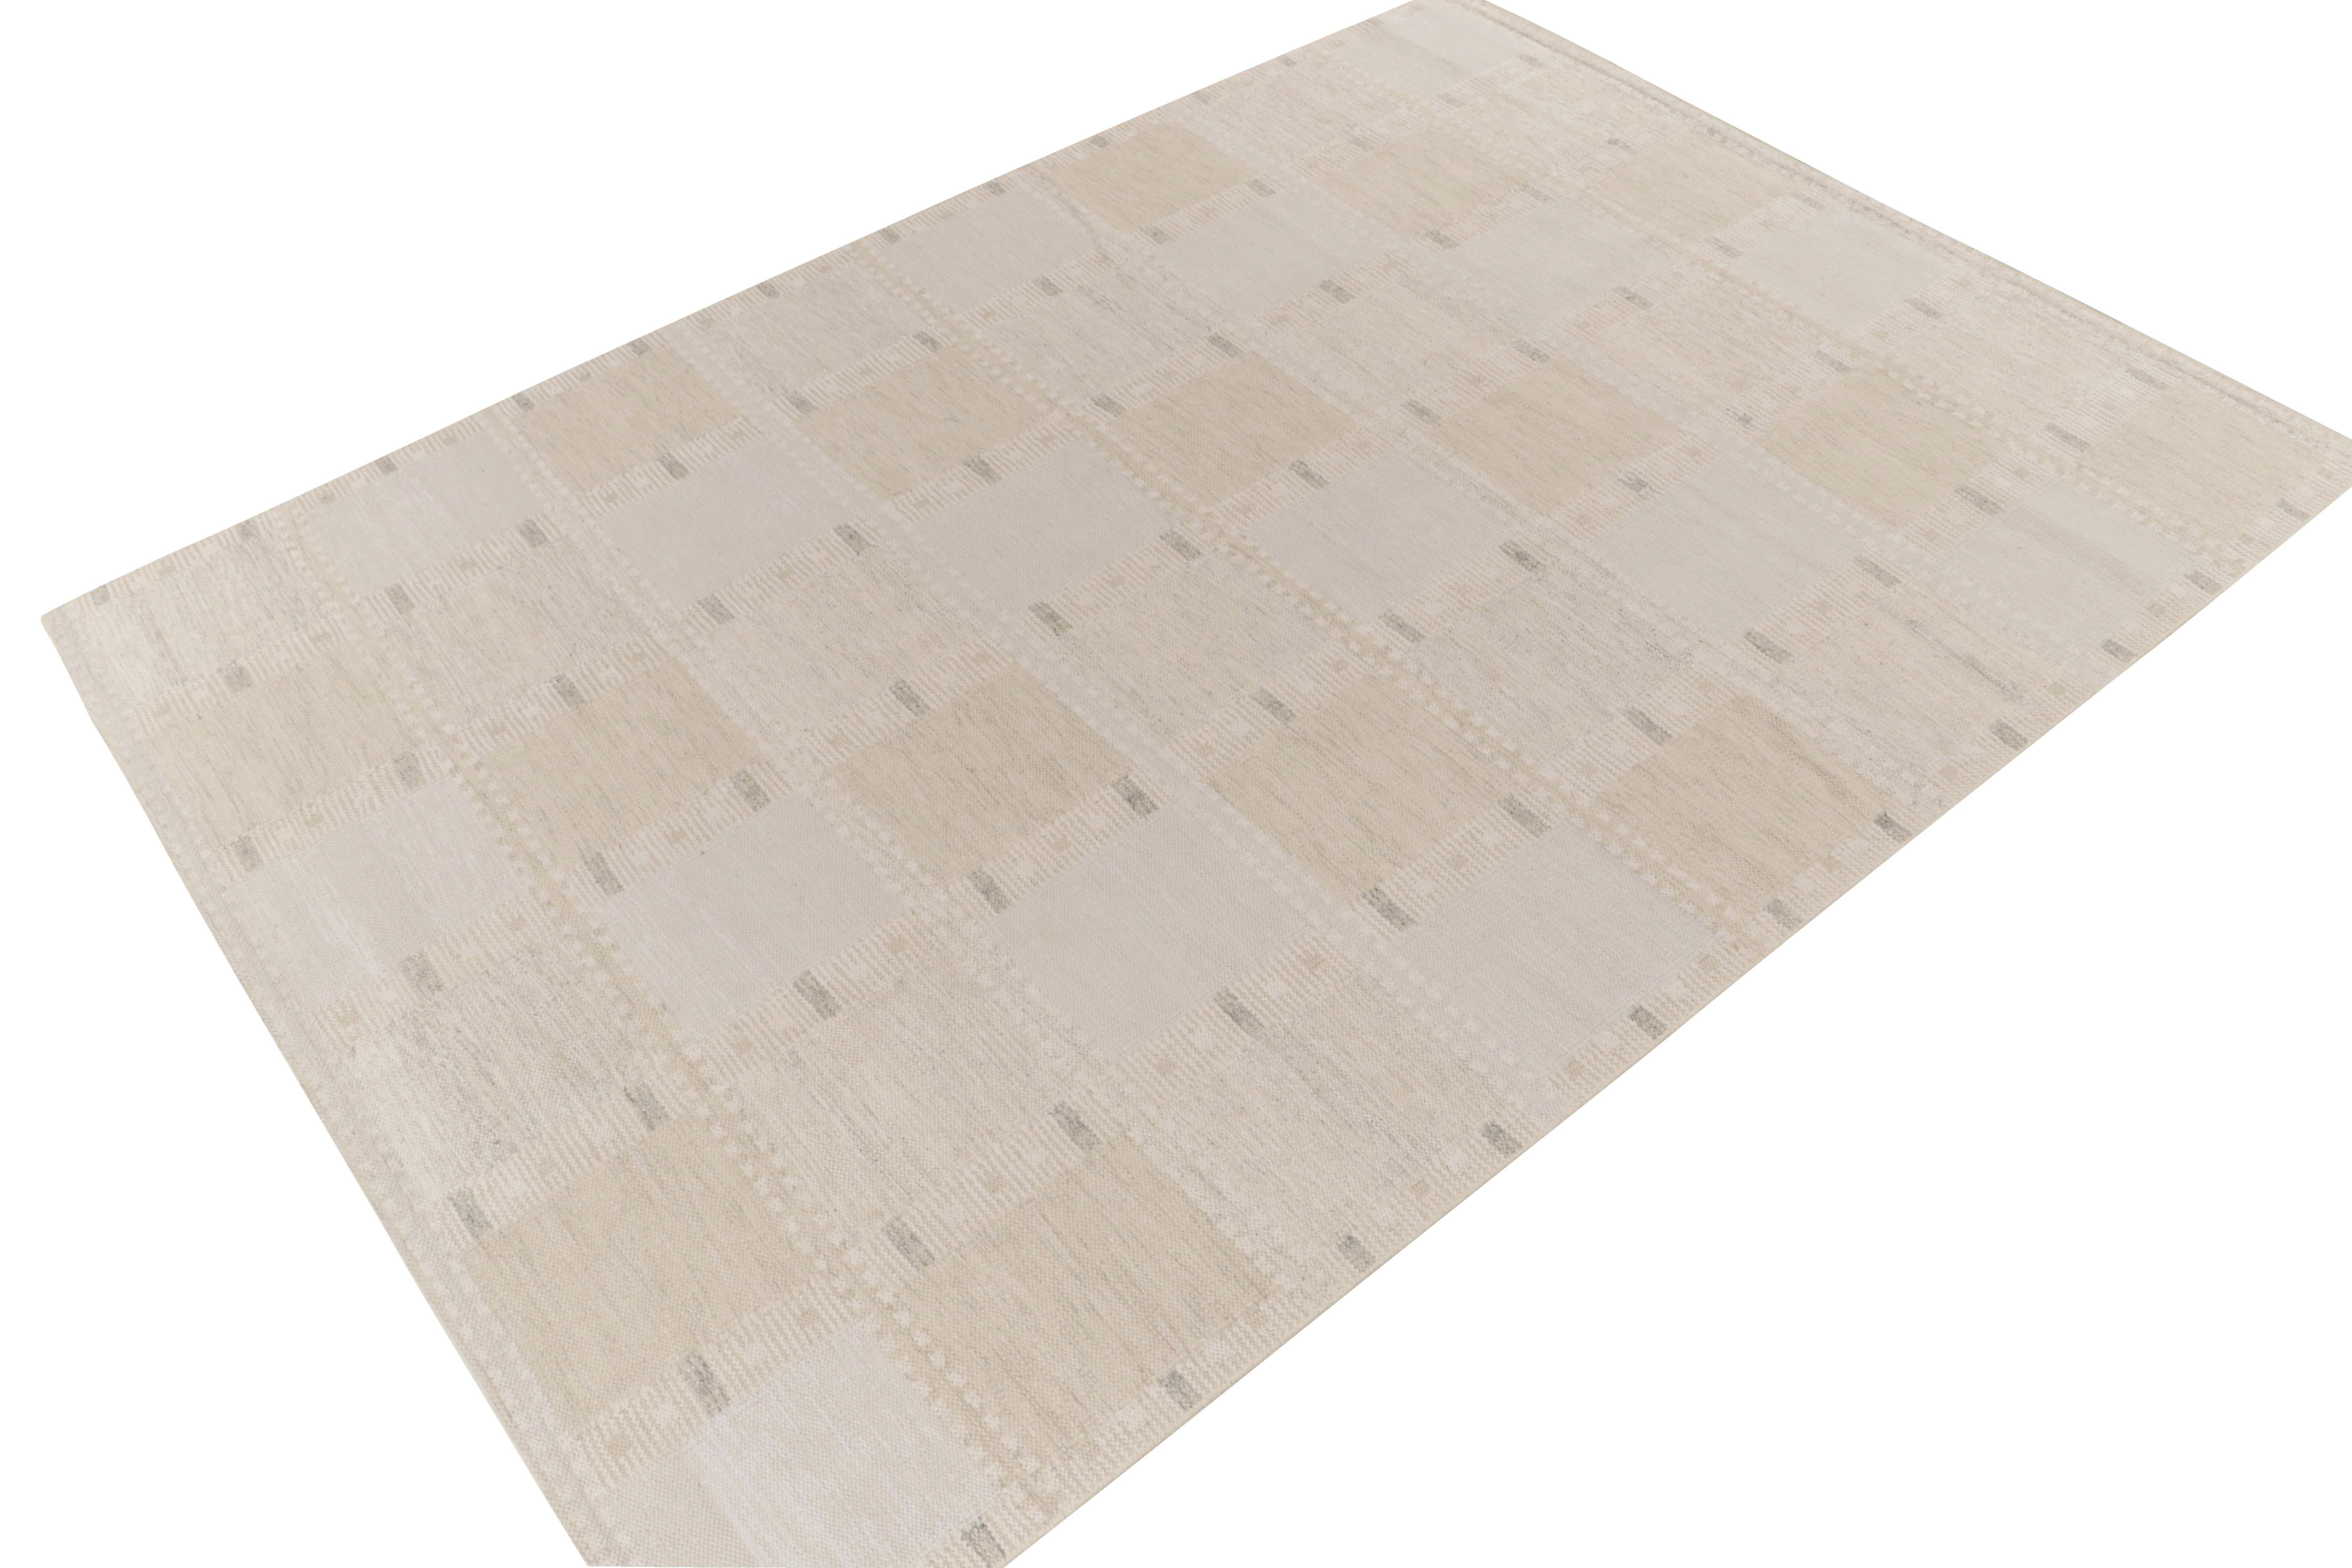 A 9x12 flat weave from Rug & Kilim’s Scandinavian Kilim Collection; among our most cherished designs in this coveted contemporary style. 

On the Design: The piece carries a cool composure with soothing tones of greige and off-white with a subdued